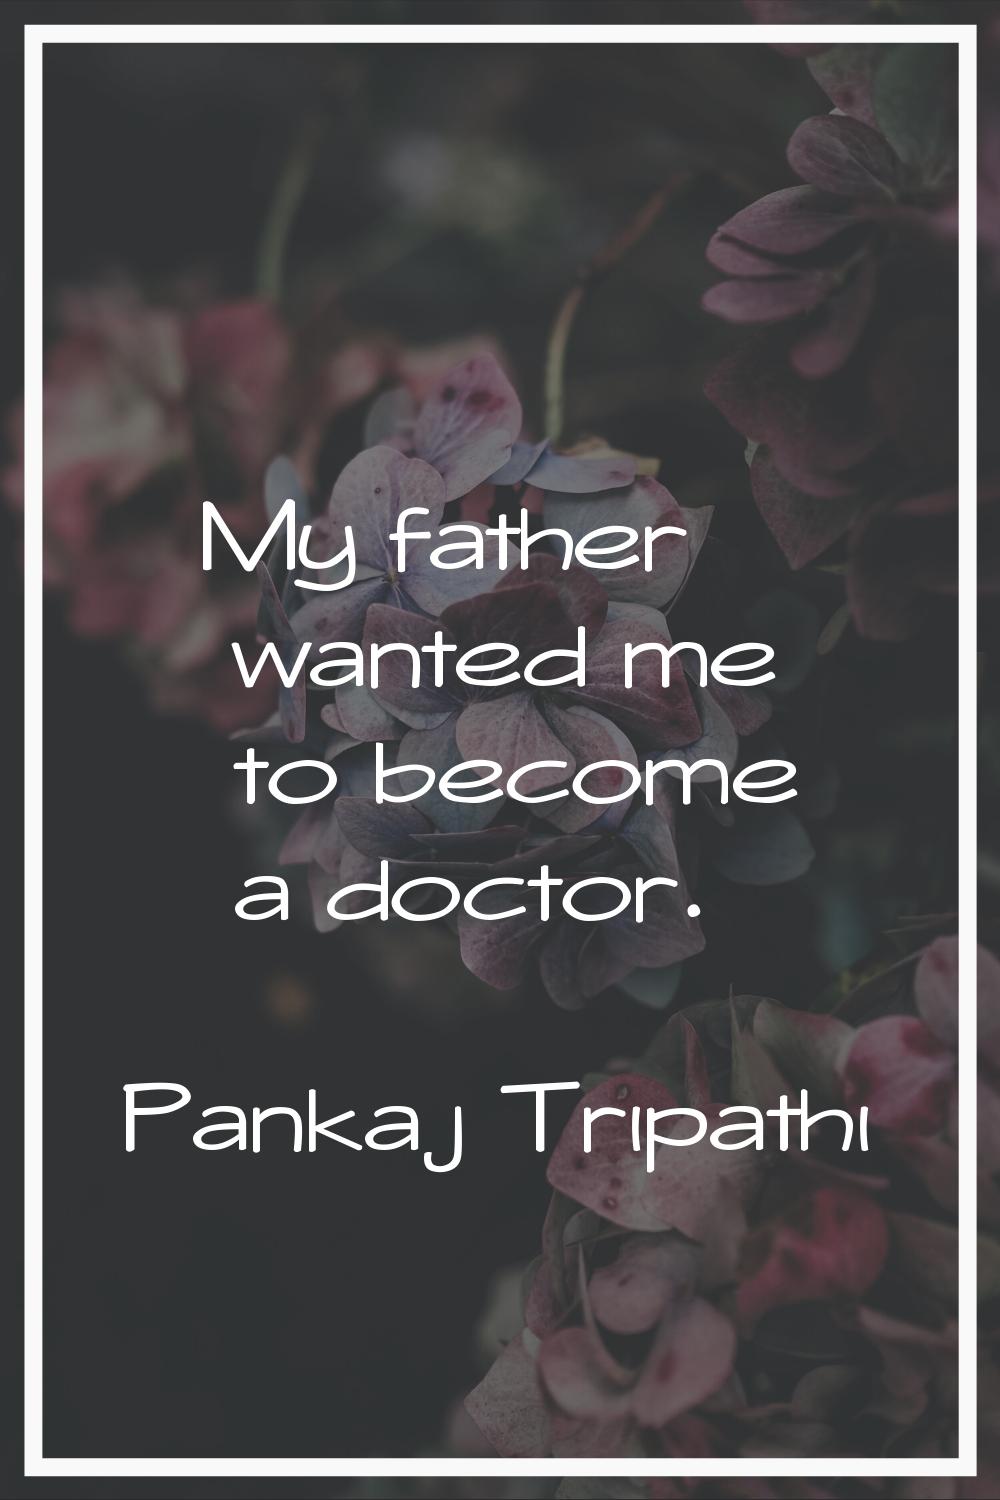 My father wanted me to become a doctor.